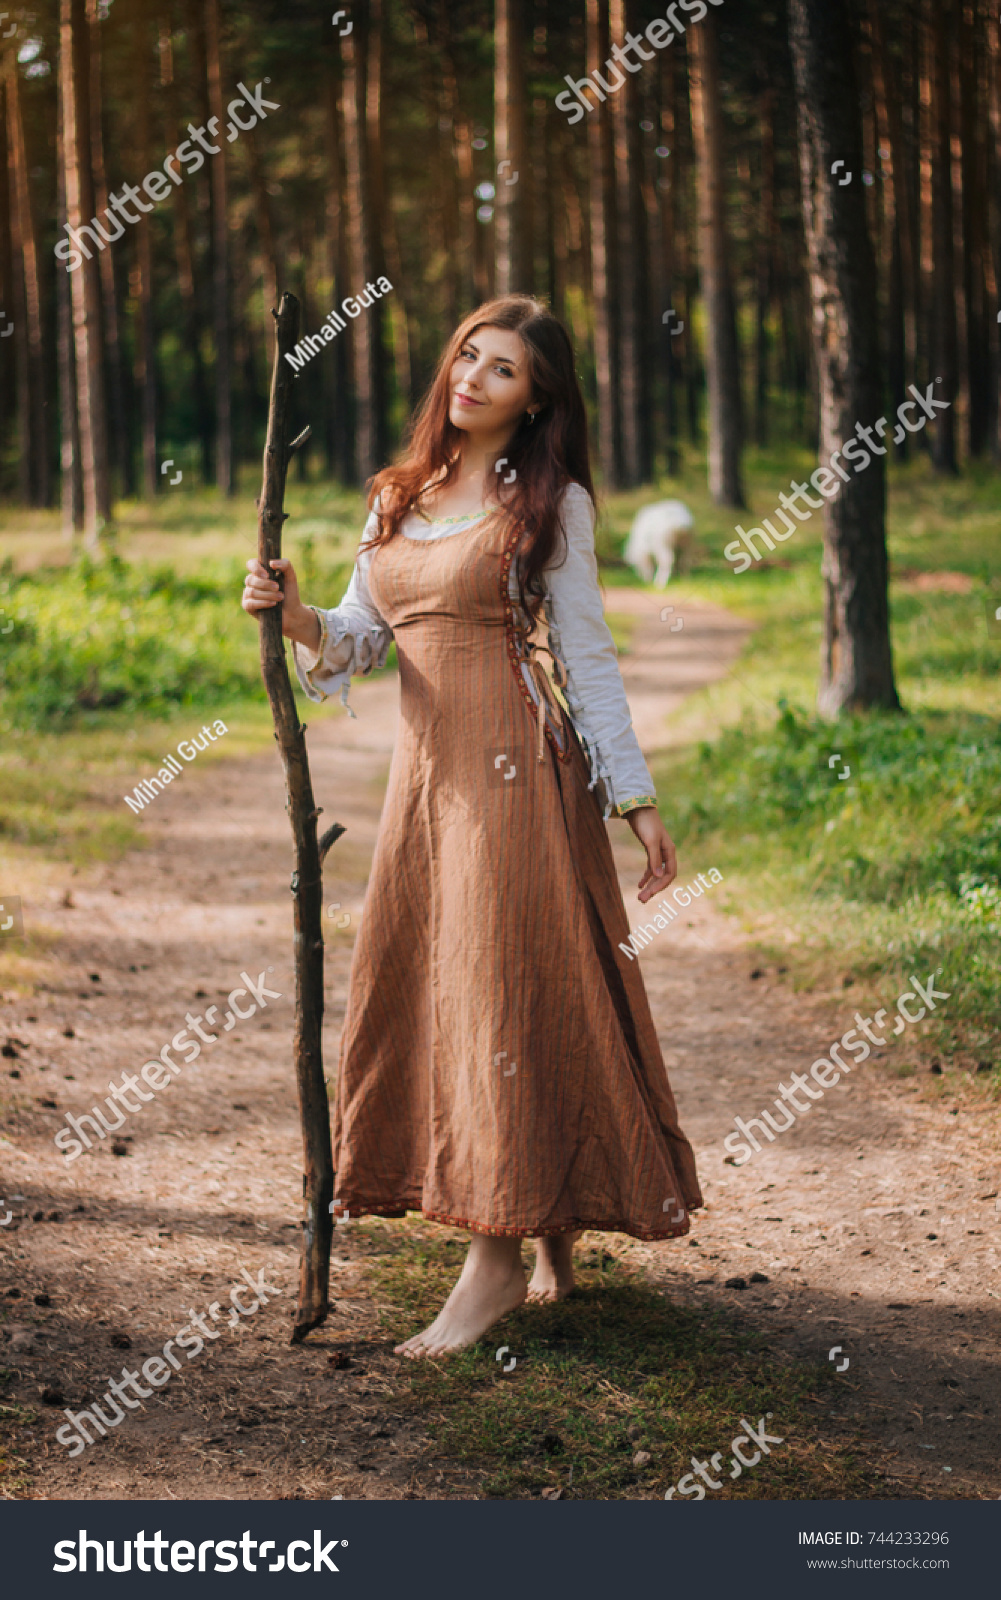 https://image.shutterstock.com/shutterstock/photos/744233296/display_1500/stock-photo-young-beautiful-girl-in-medieval-cowboy-clothes-with-a-stick-in-hand-barefoot-on-the-ground-744233296.jpg